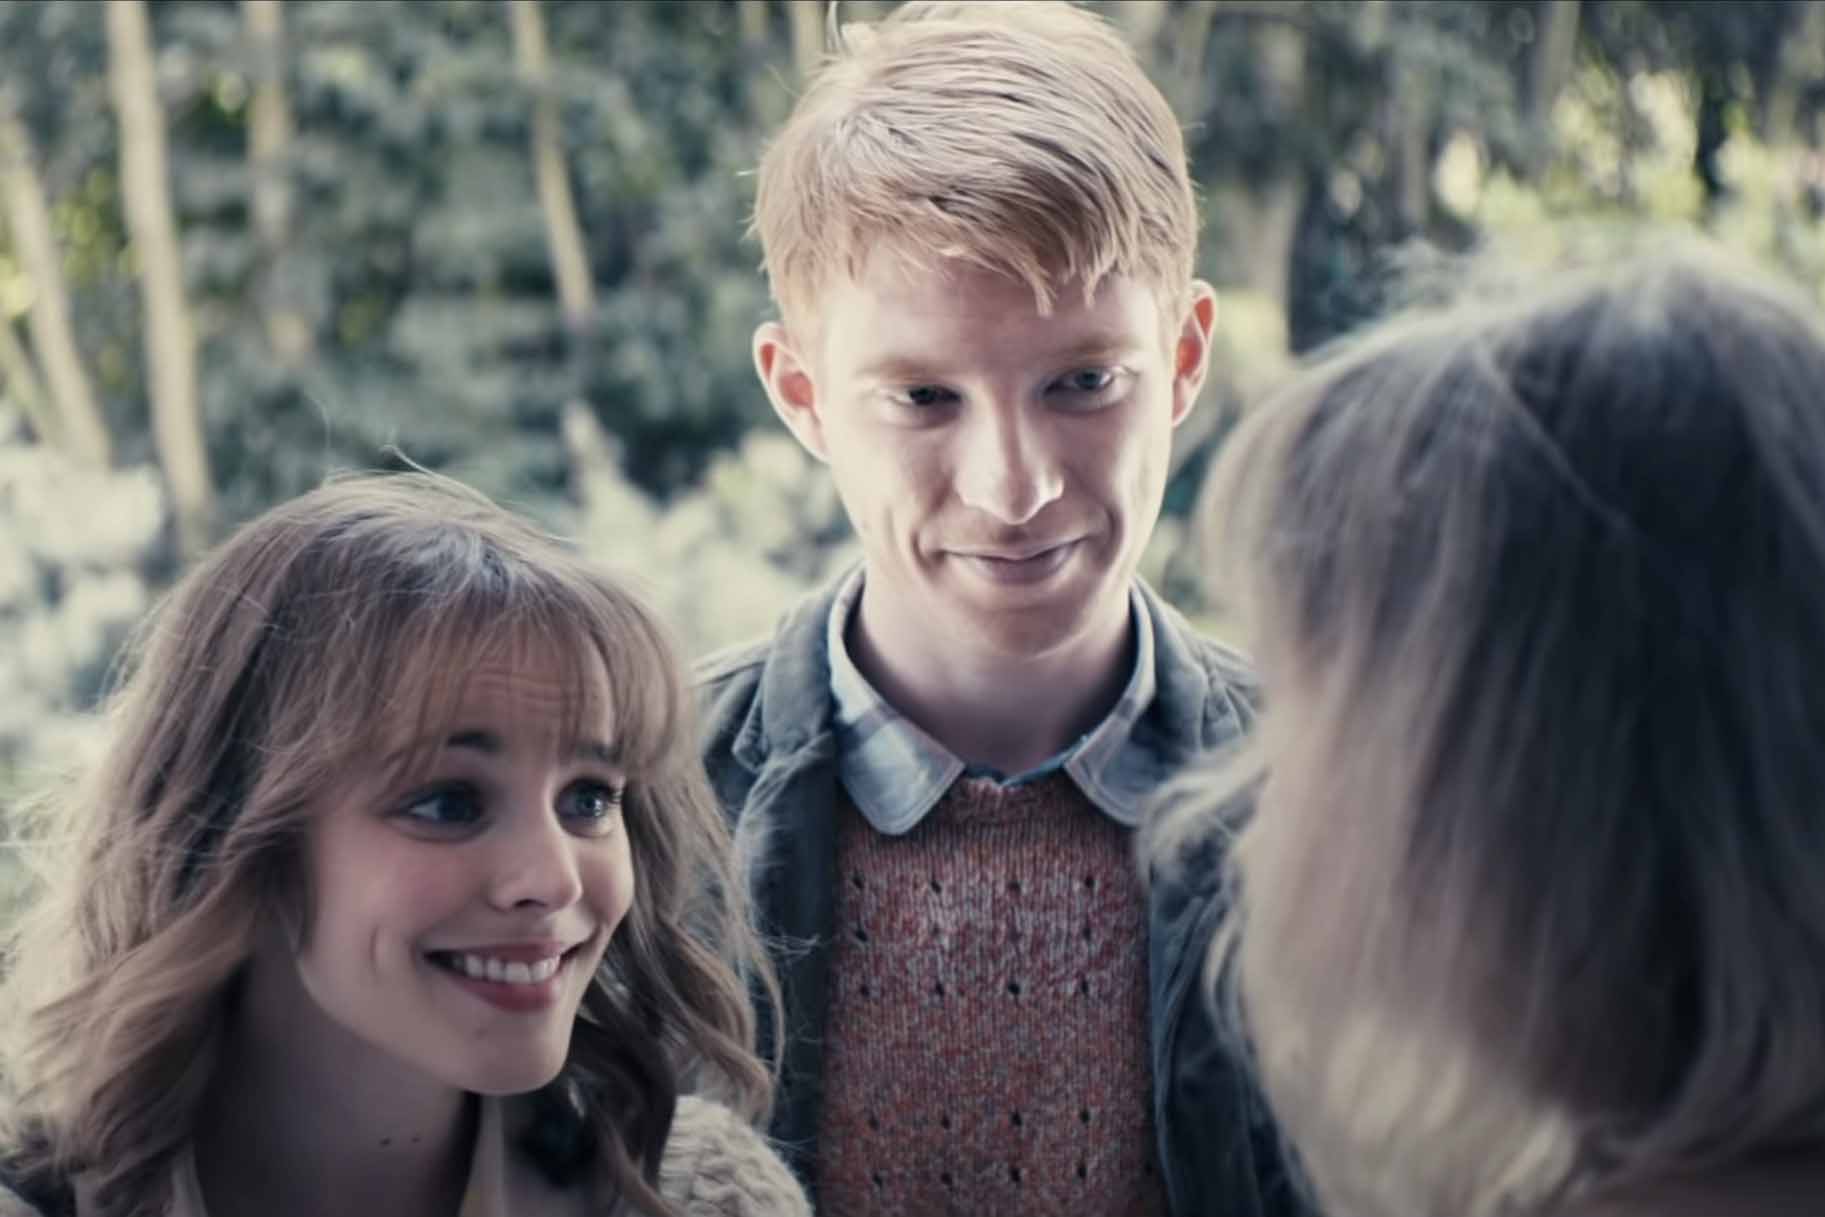 Mary (Rachel McAdams) and Tim Lake (Domhnall Gleeson) smile at a woman in About Time (2013).